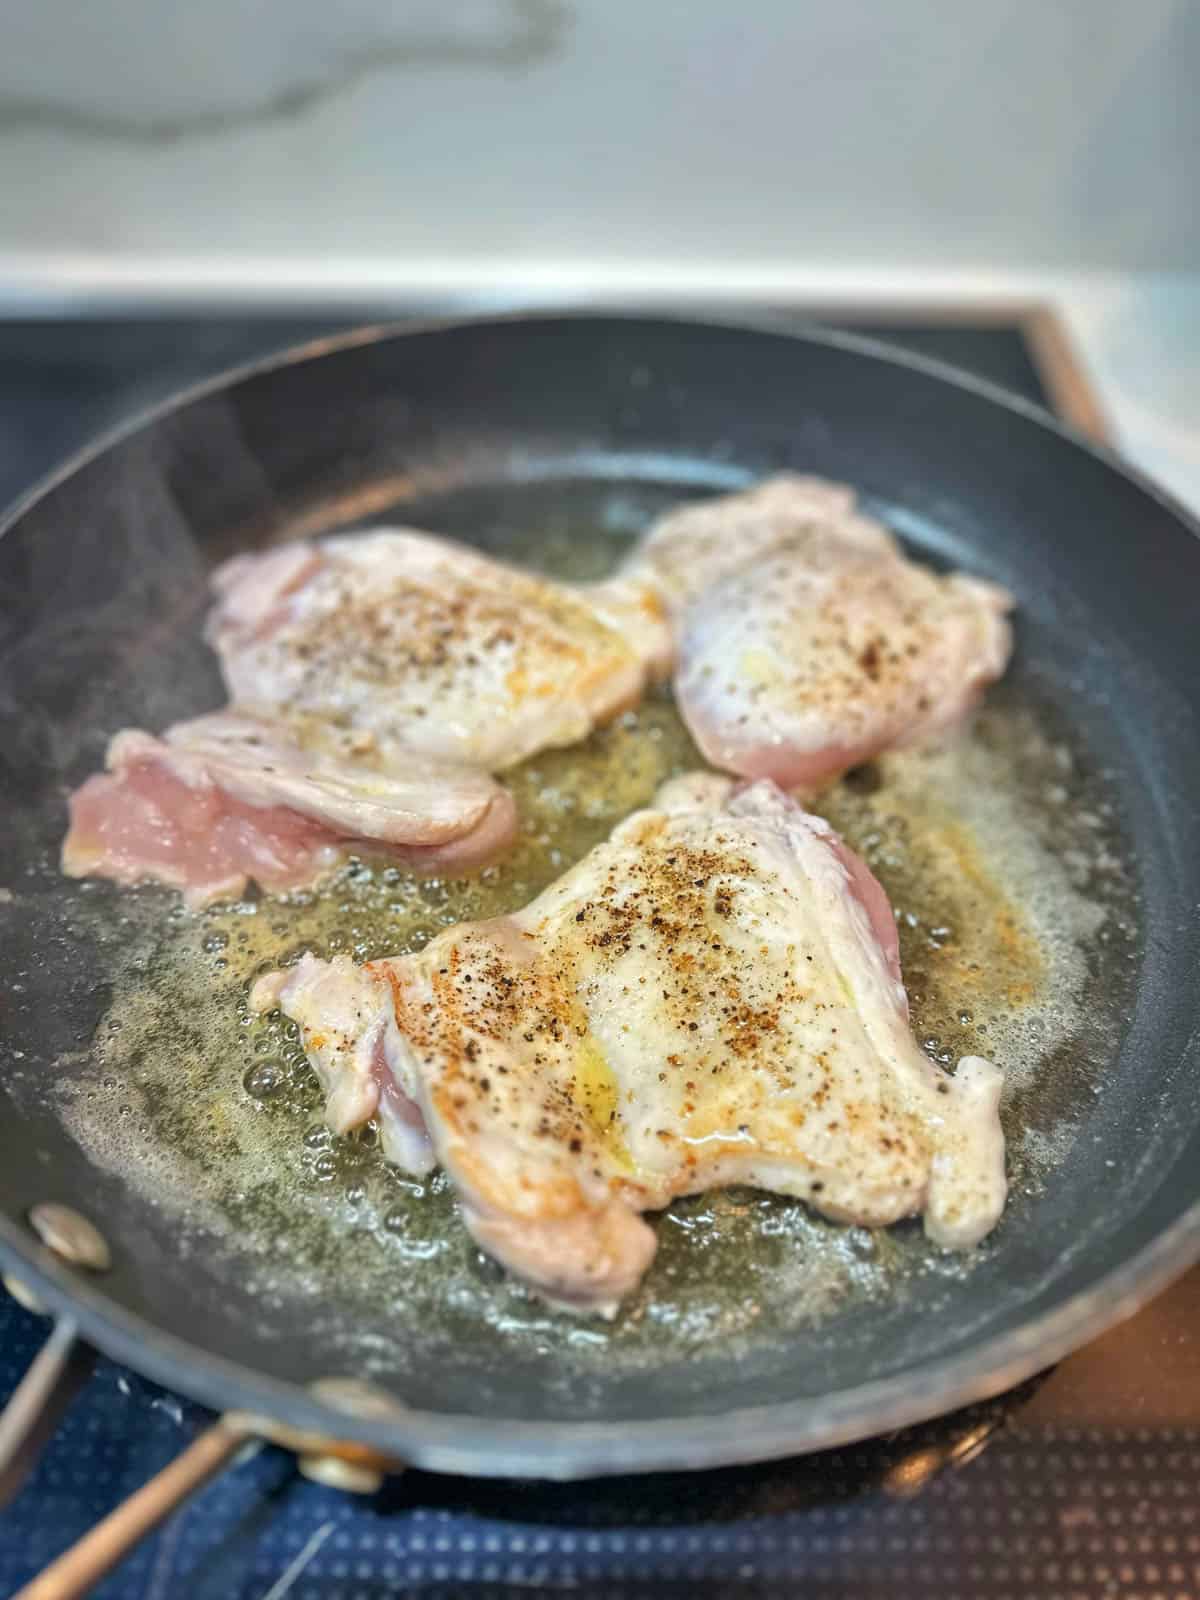 Searing chicken thigh fillets in a frying pan. 